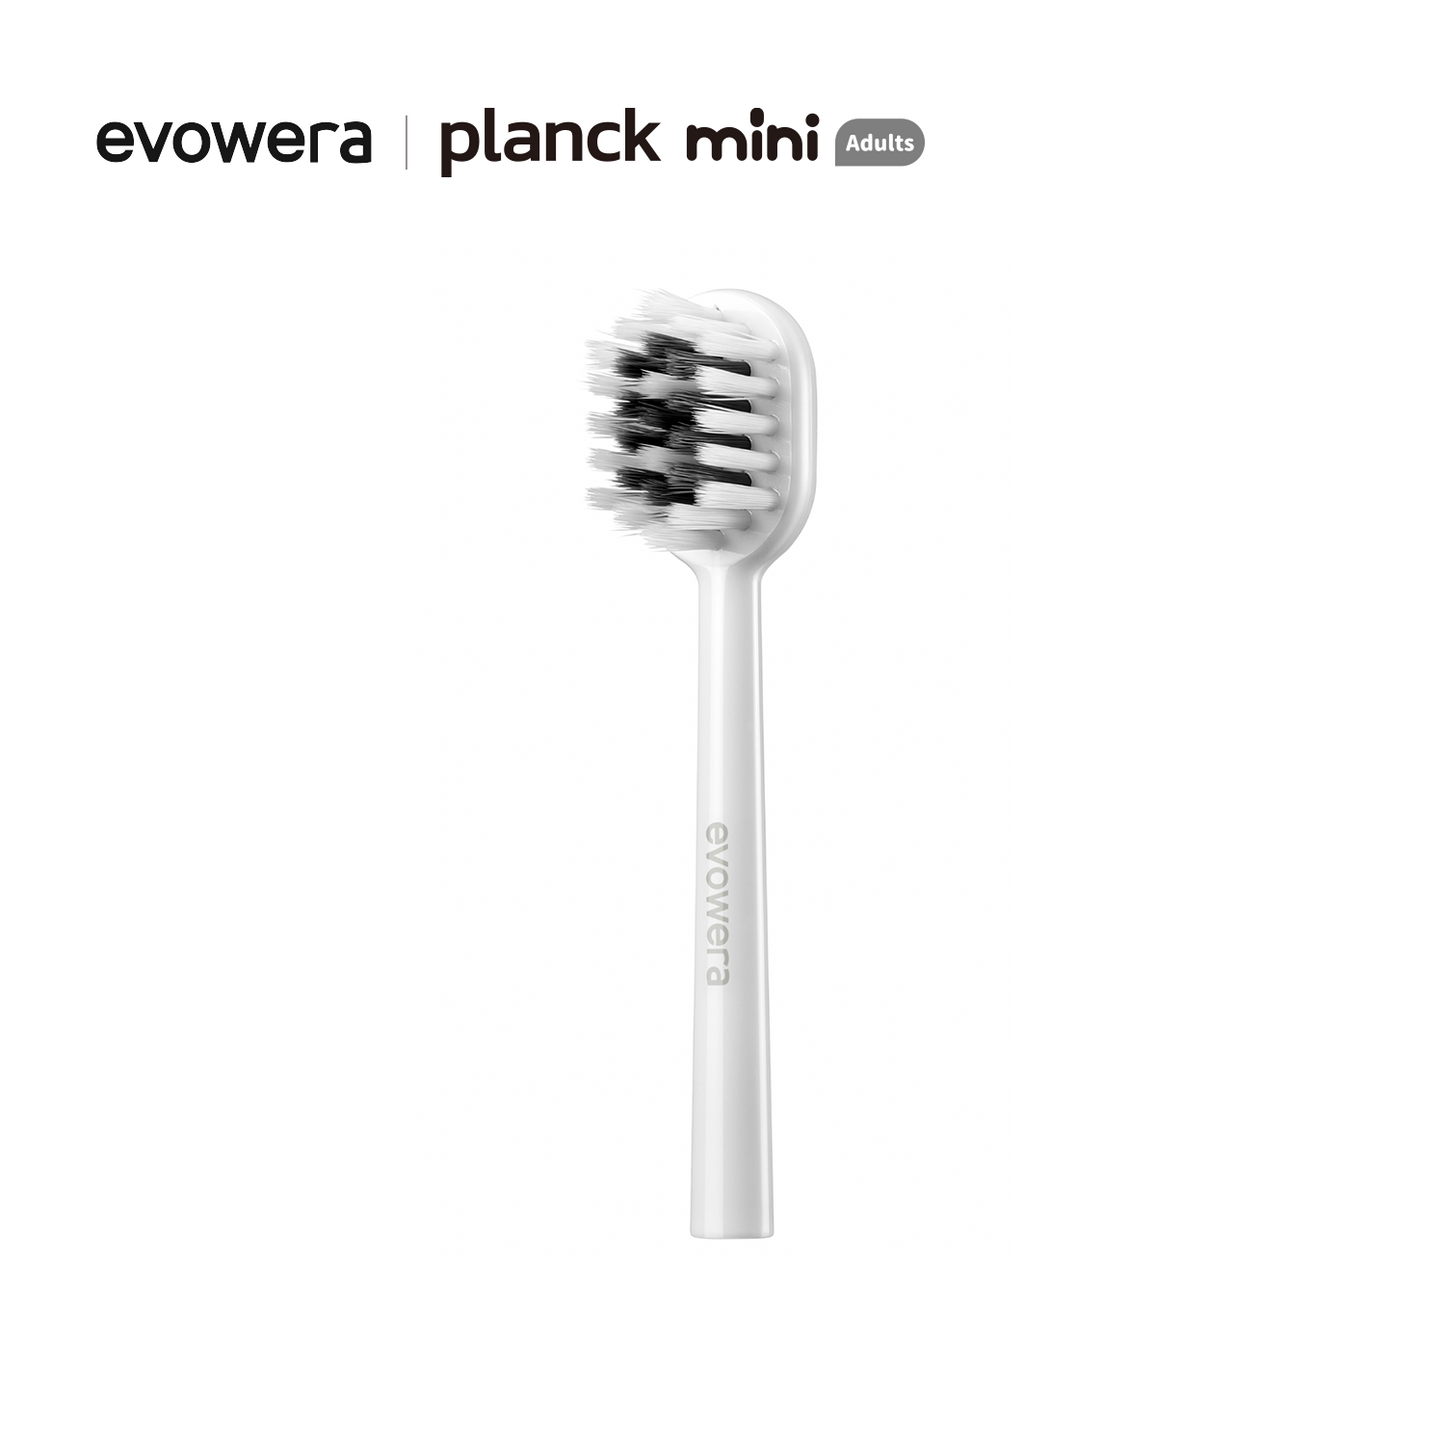 planck mini Replacement Brush Heads, 2-Count, Adults